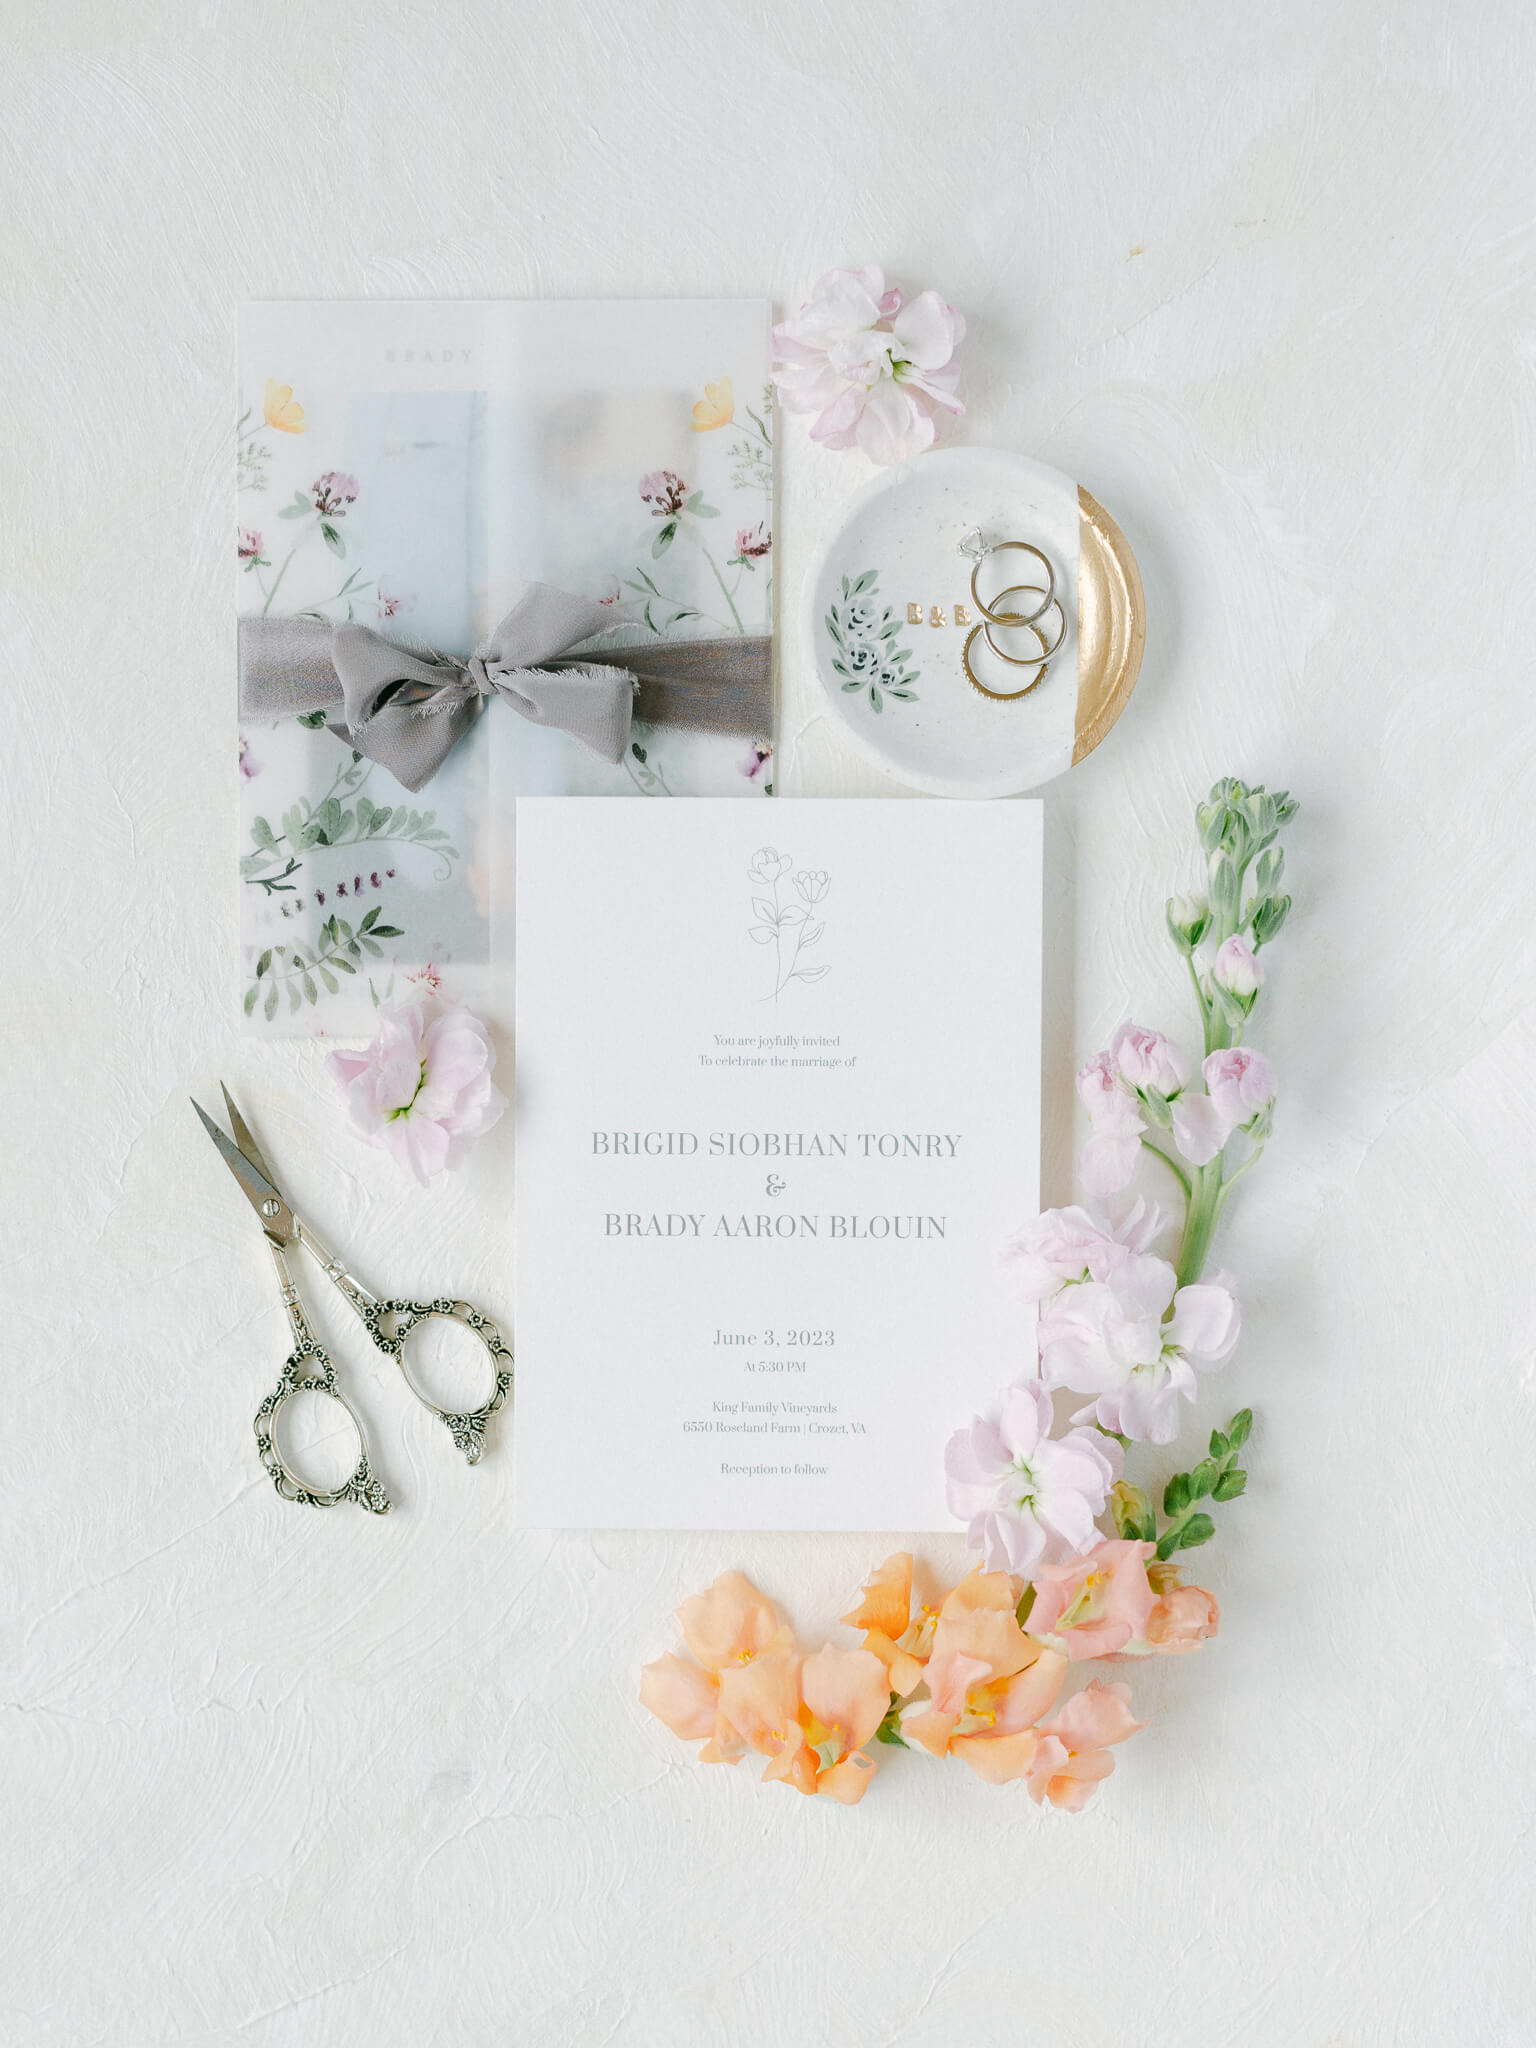 A wedding flatlay on a white mat with an invitation, rings in a small dish, colorful flowers and small scissors.